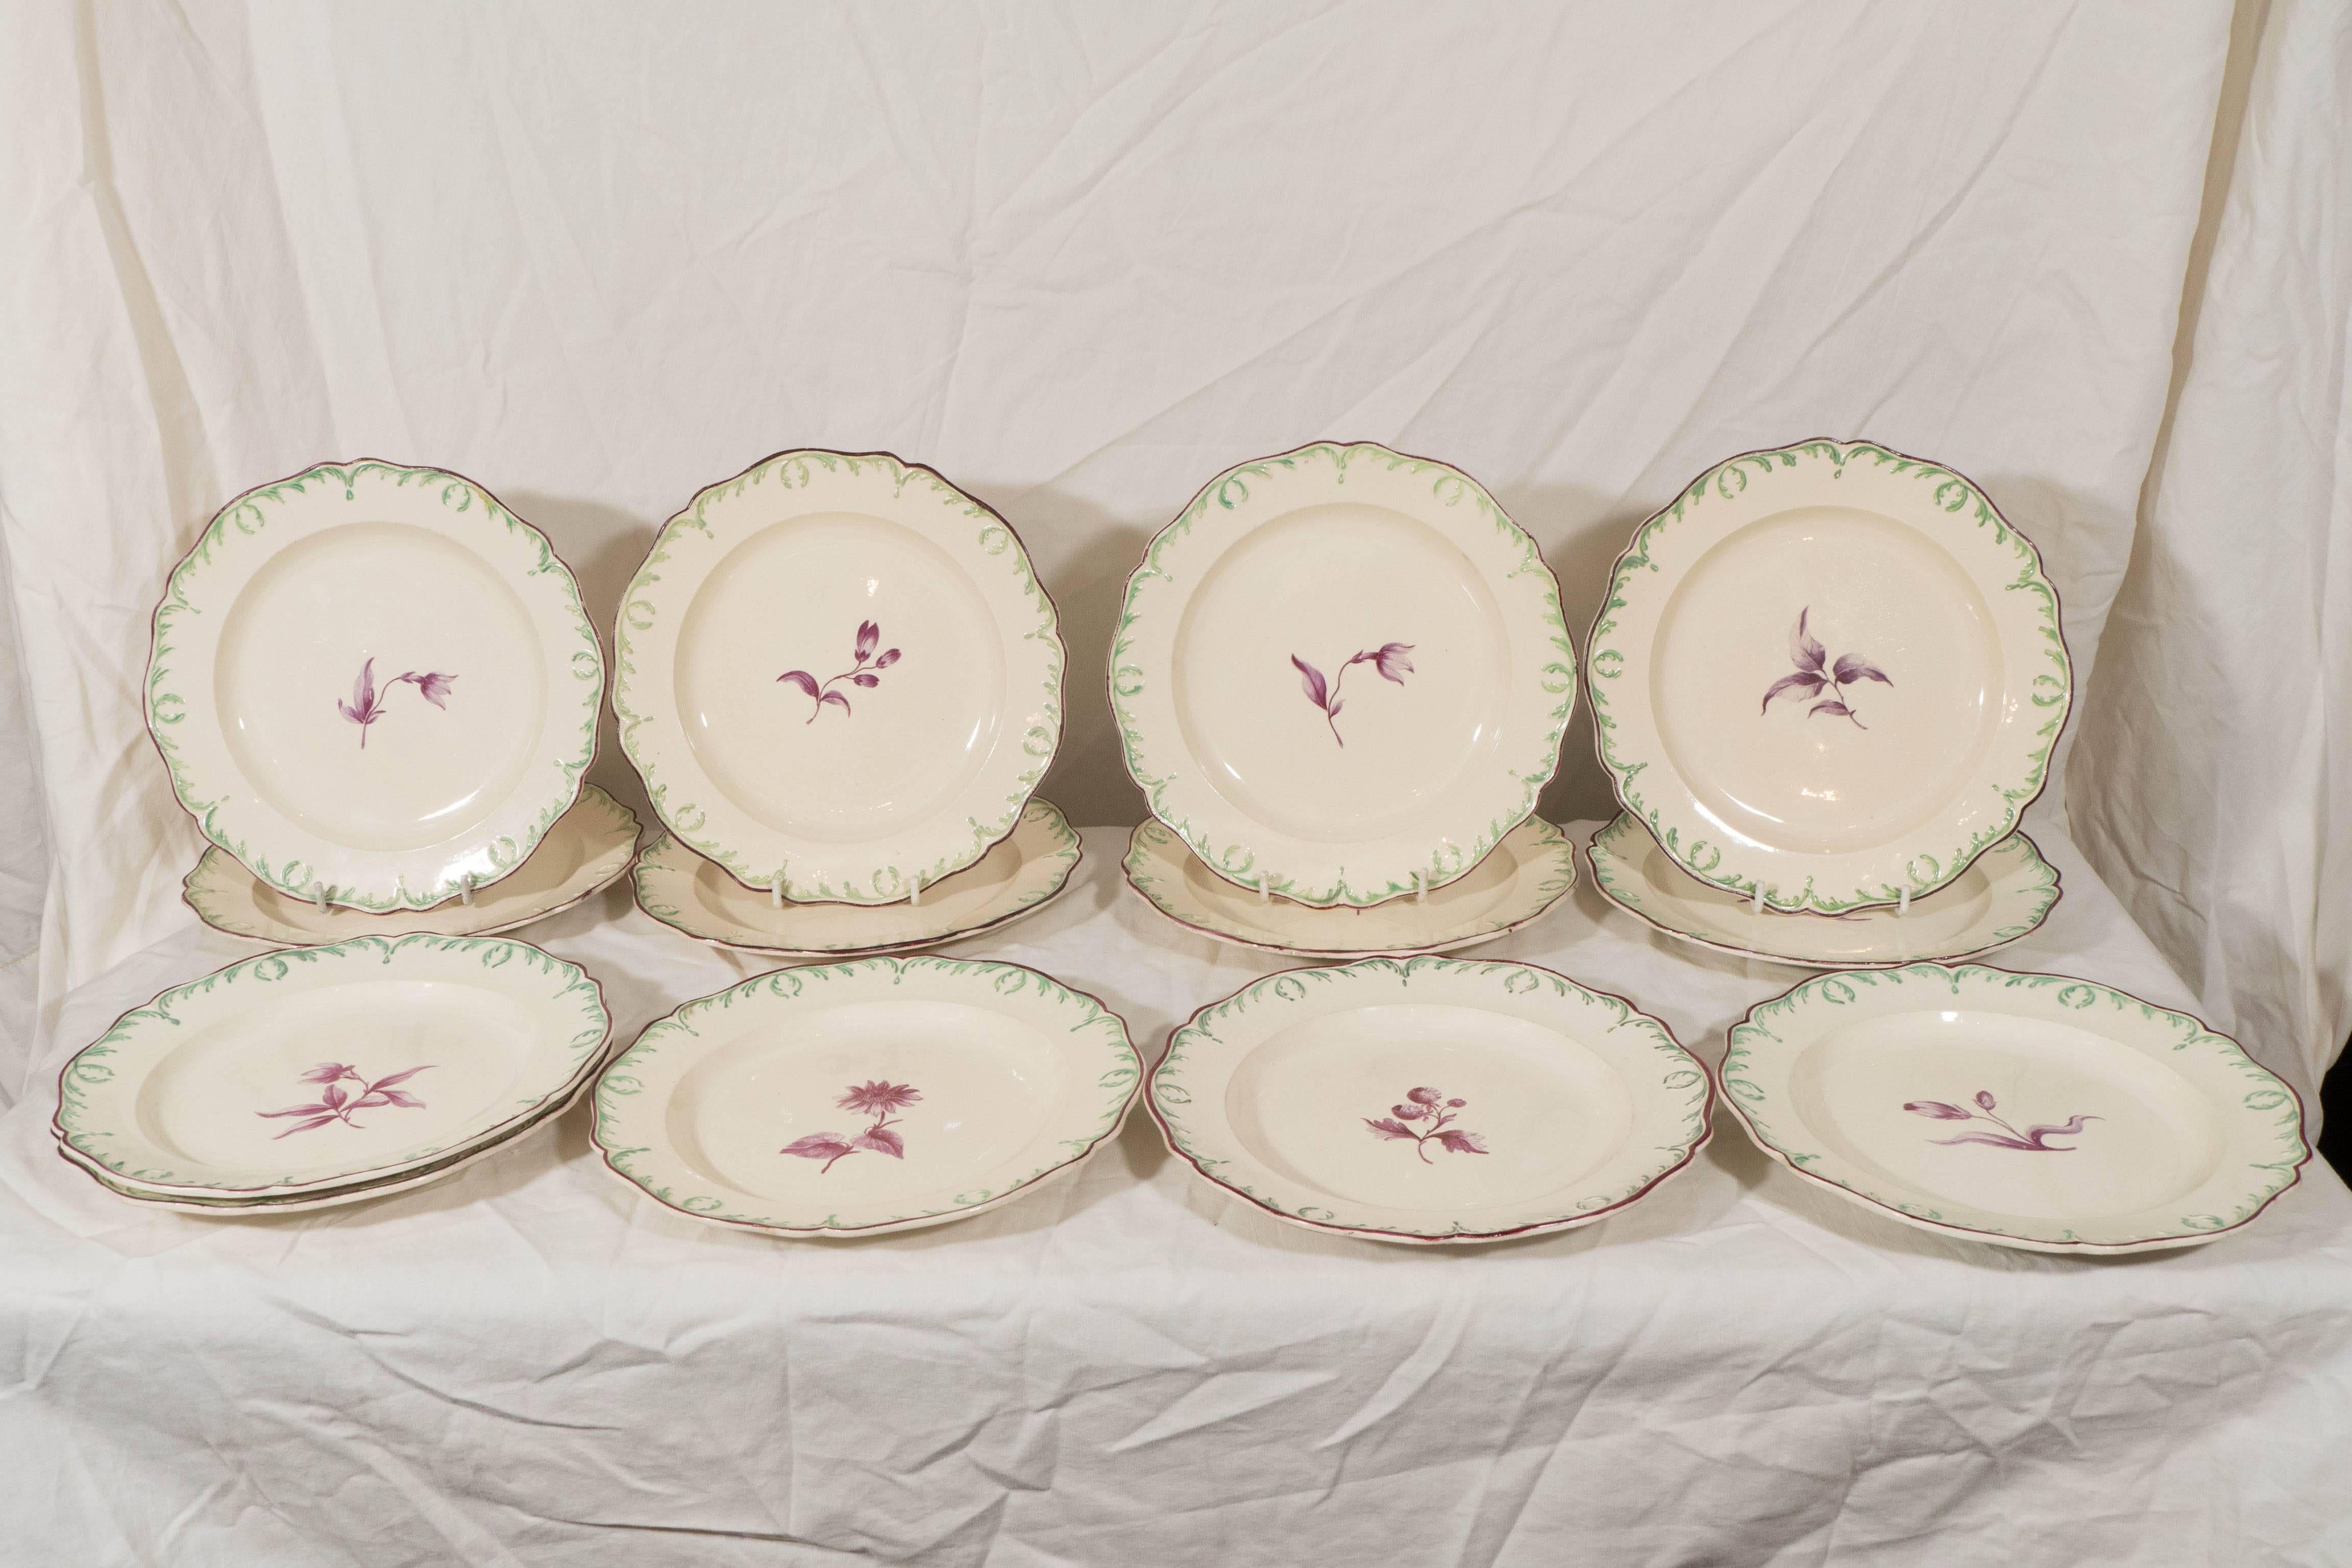 Hand-Painted Antique Wedgwood Creamware Dishes18th Century with a Green Feather Edge